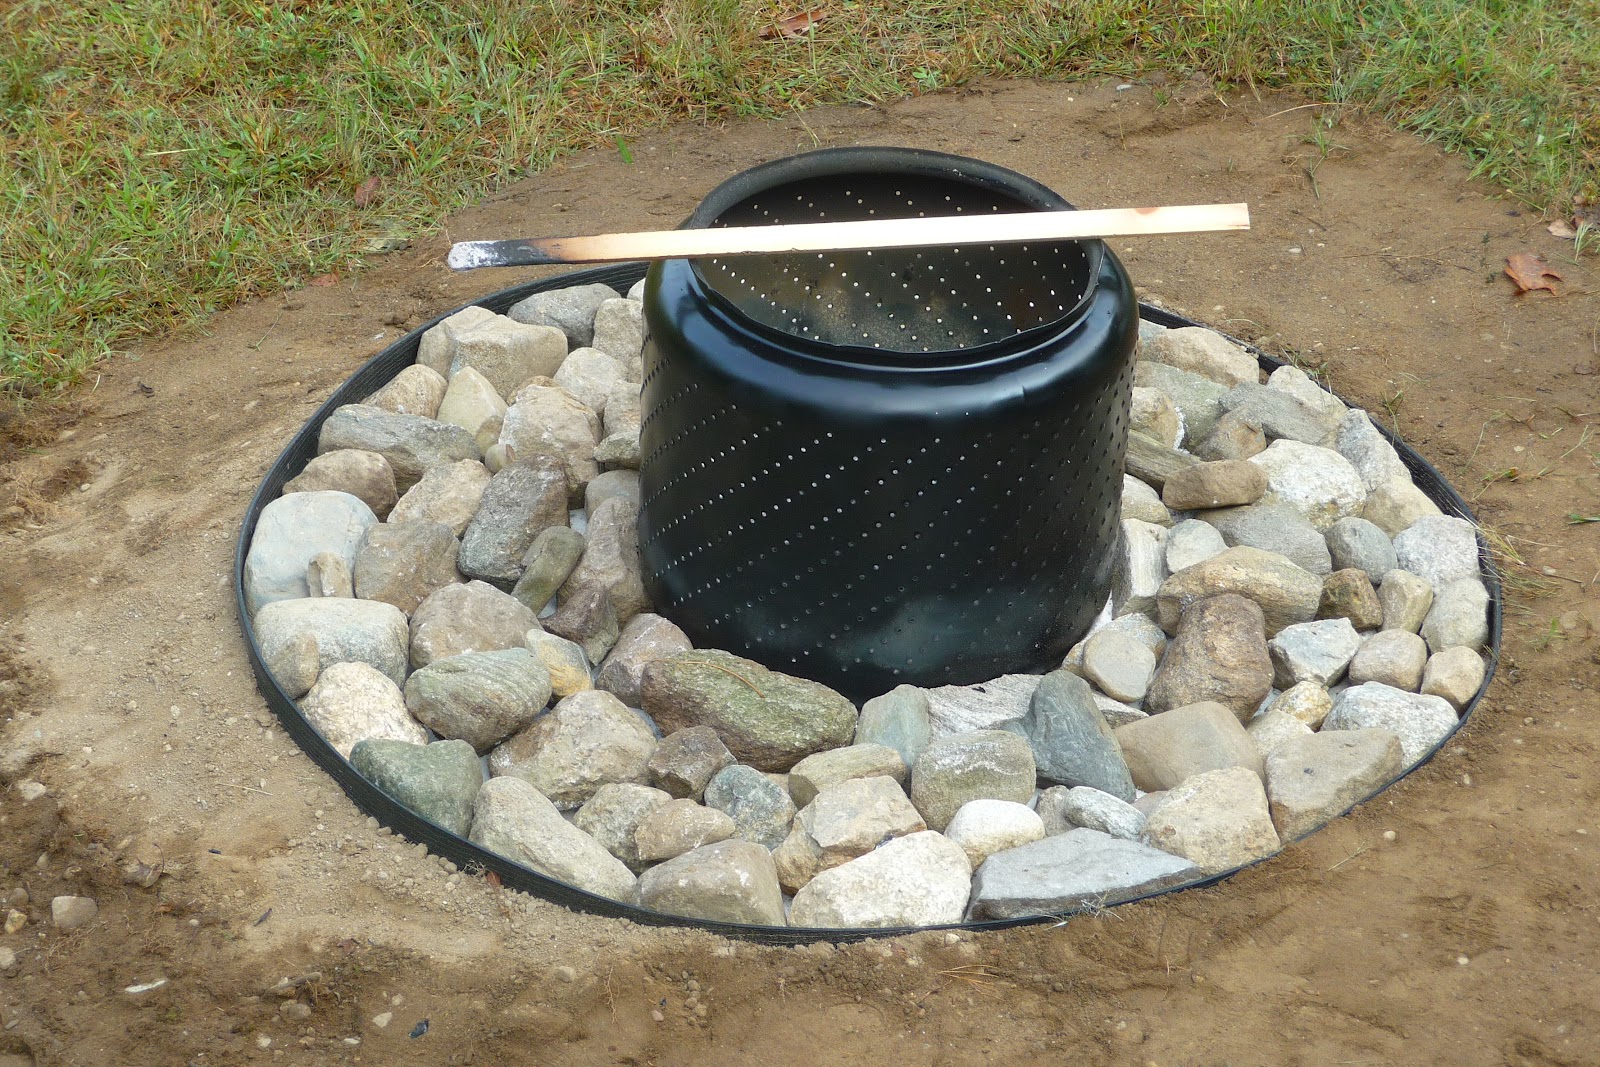 Diy Fire Pit For As Little 0, Washer Basket Fire Pit